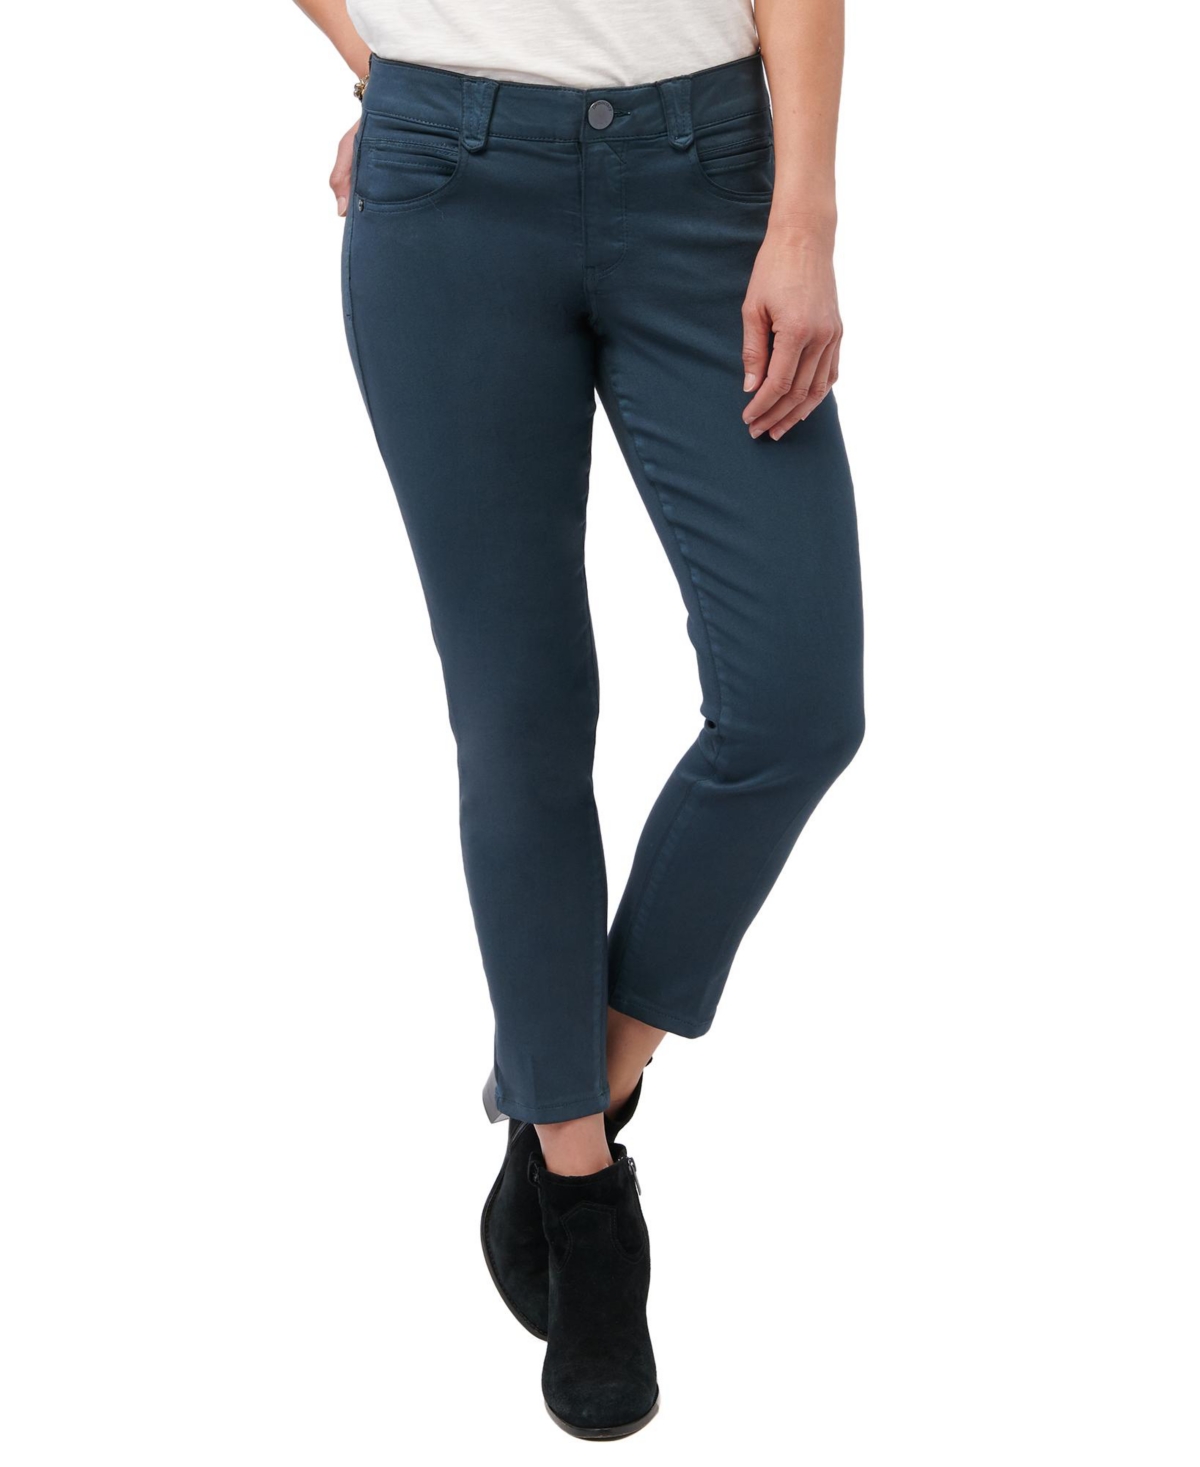 Democracy Women's Ab Solution Ankle Length Jeans